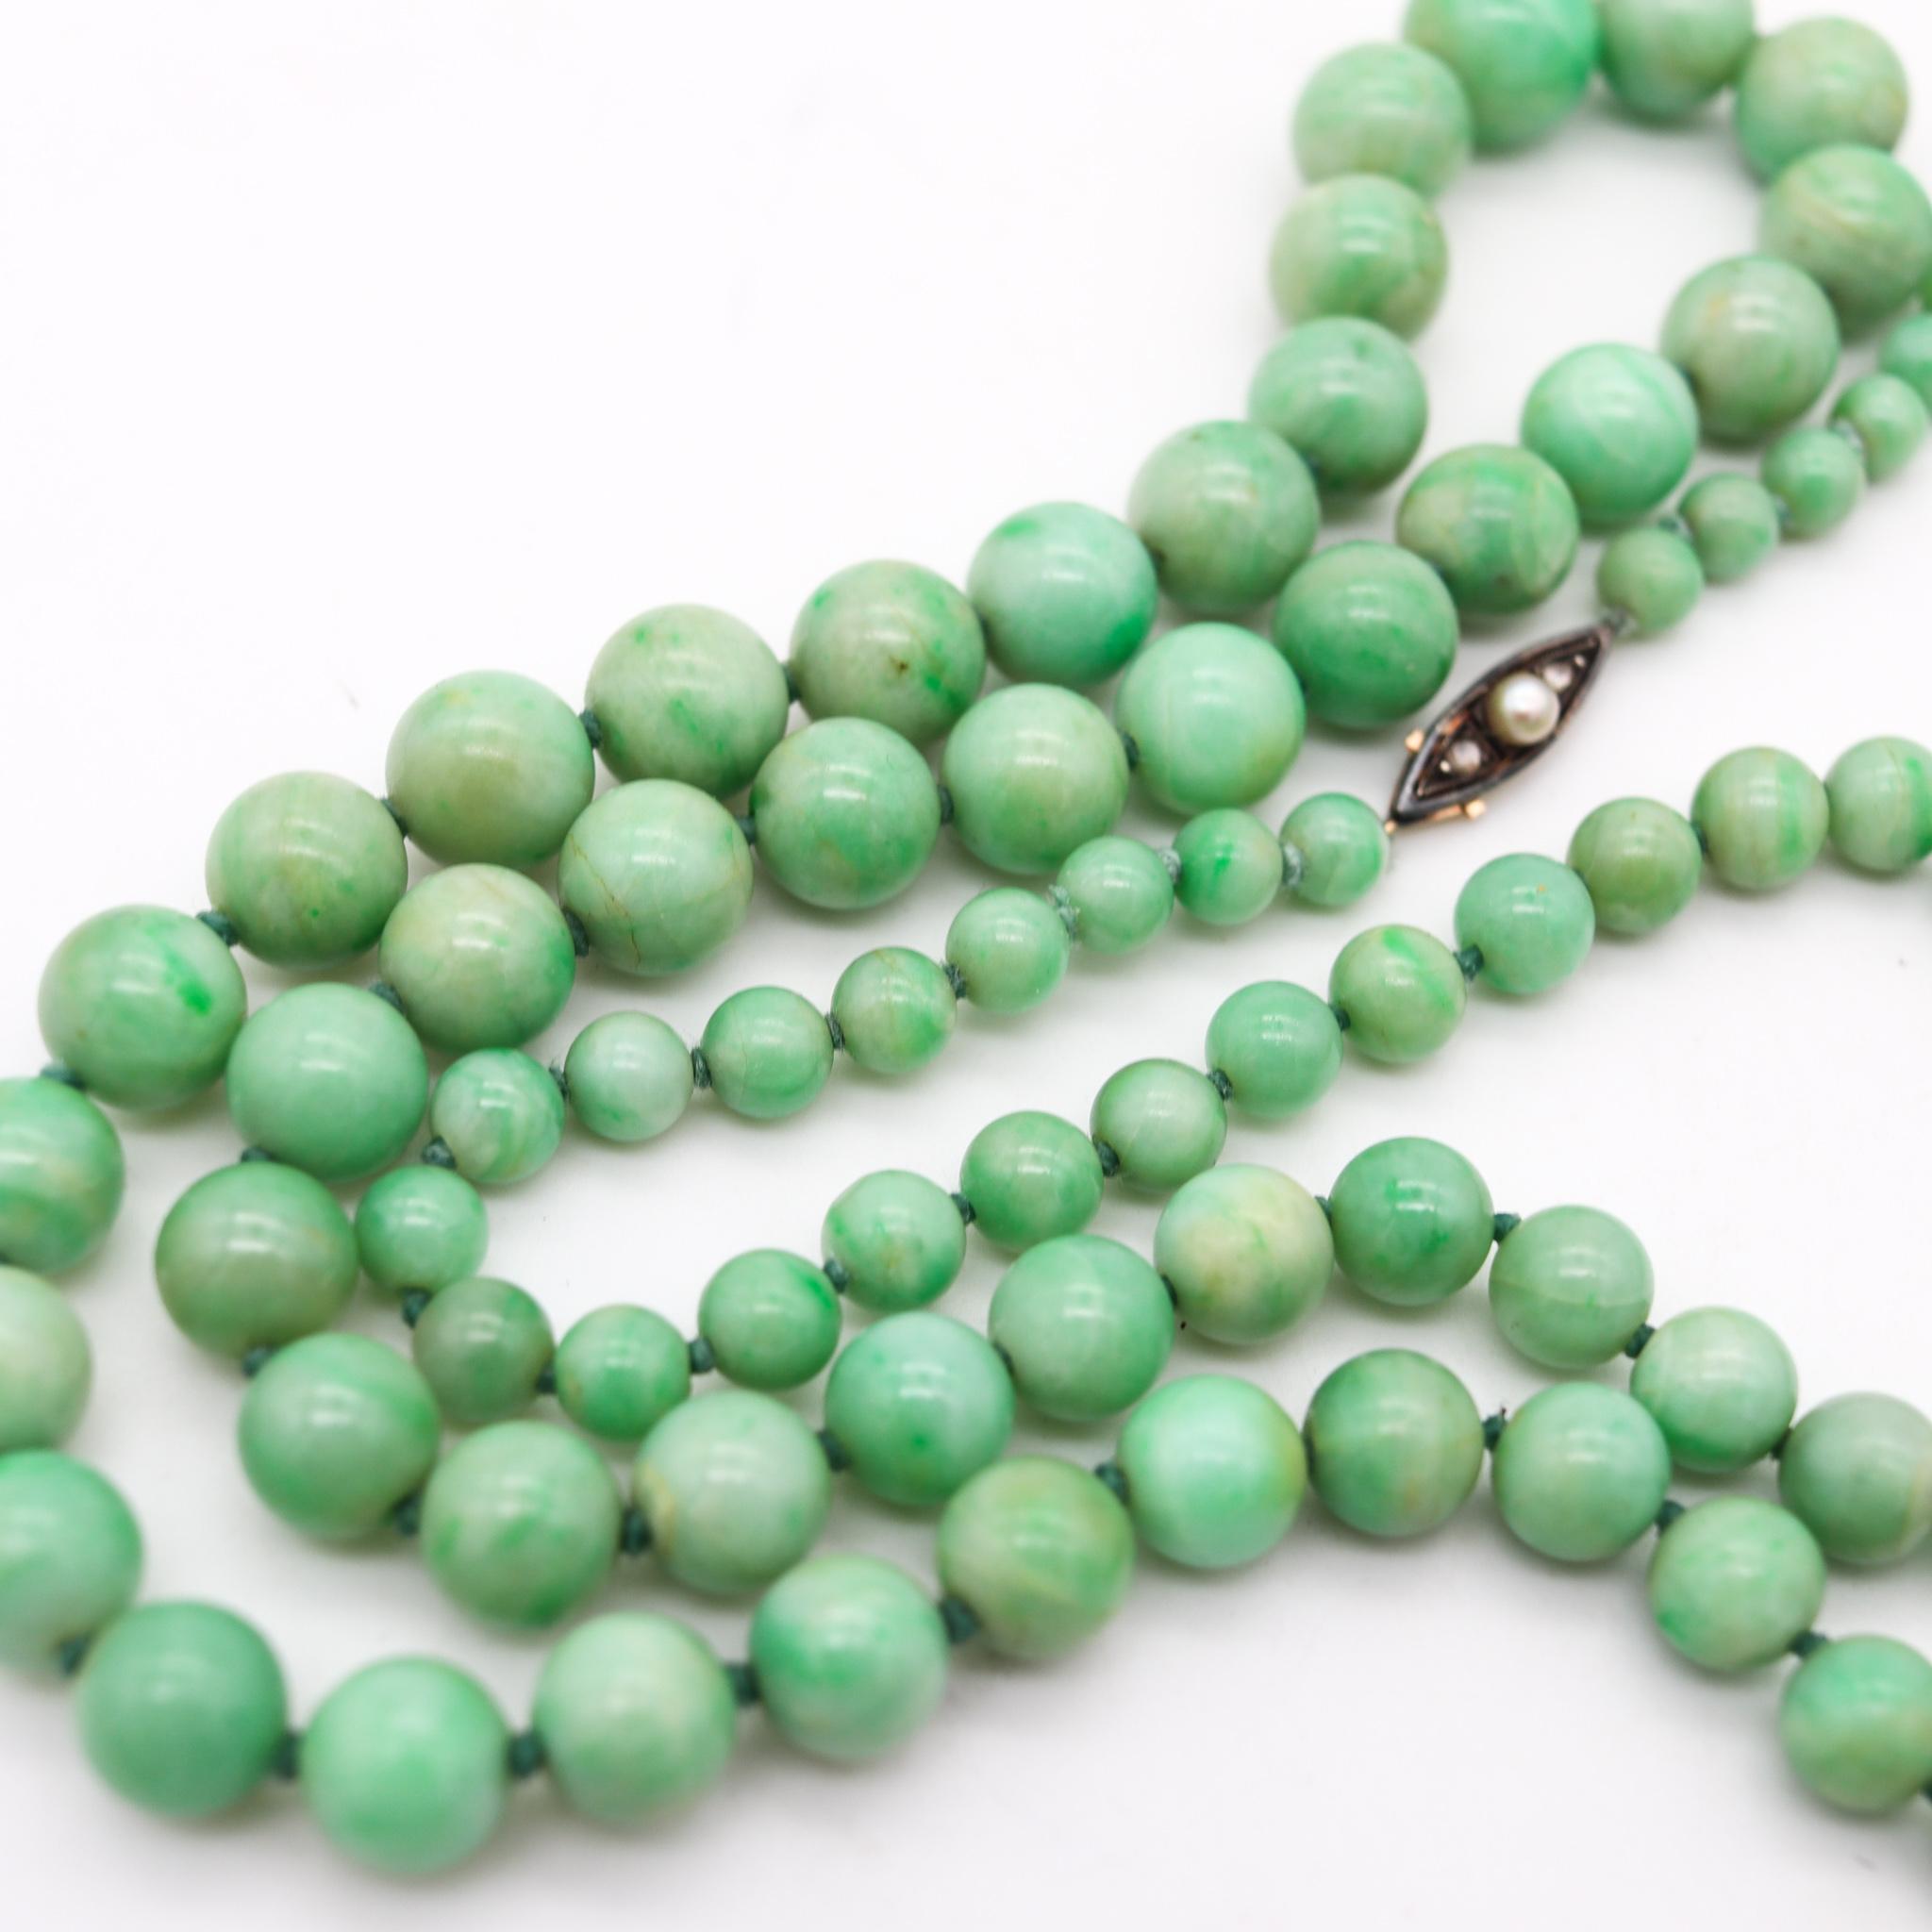 Round Cut Art Deco 1930 Graduated Beads Necklace with Nephrite Jadeite Jade and 18kt Gold For Sale